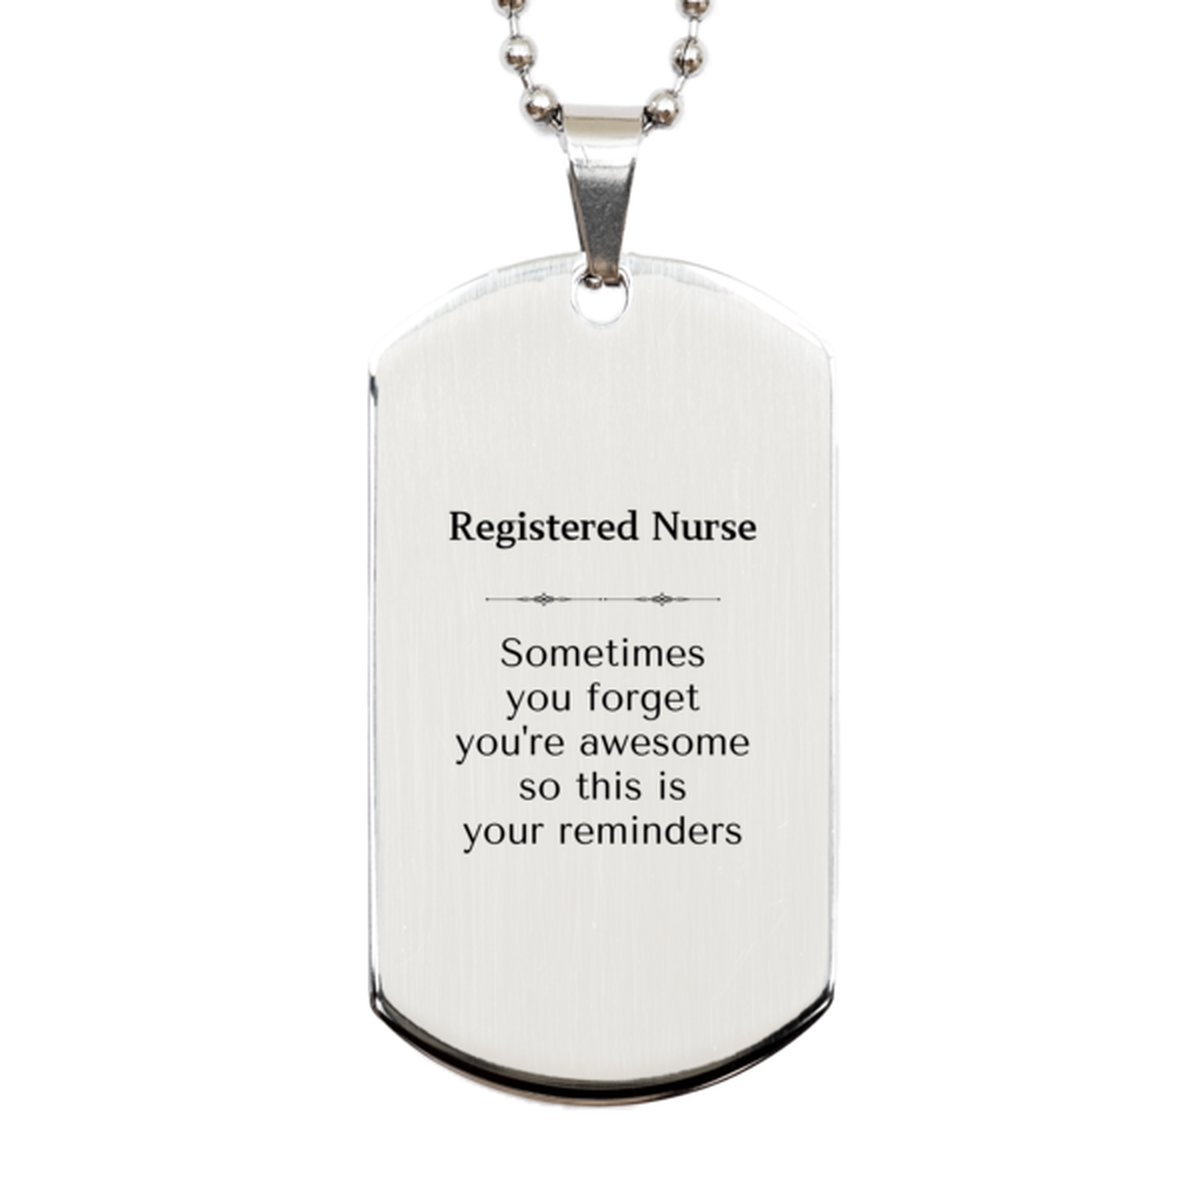 Sentimental Registered Nurse Silver Dog Tag, Registered Nurse Sometimes you forget you're awesome so this is your reminders, Graduation Christmas Birthday Gifts for Registered Nurse, Men, Women, Coworkers